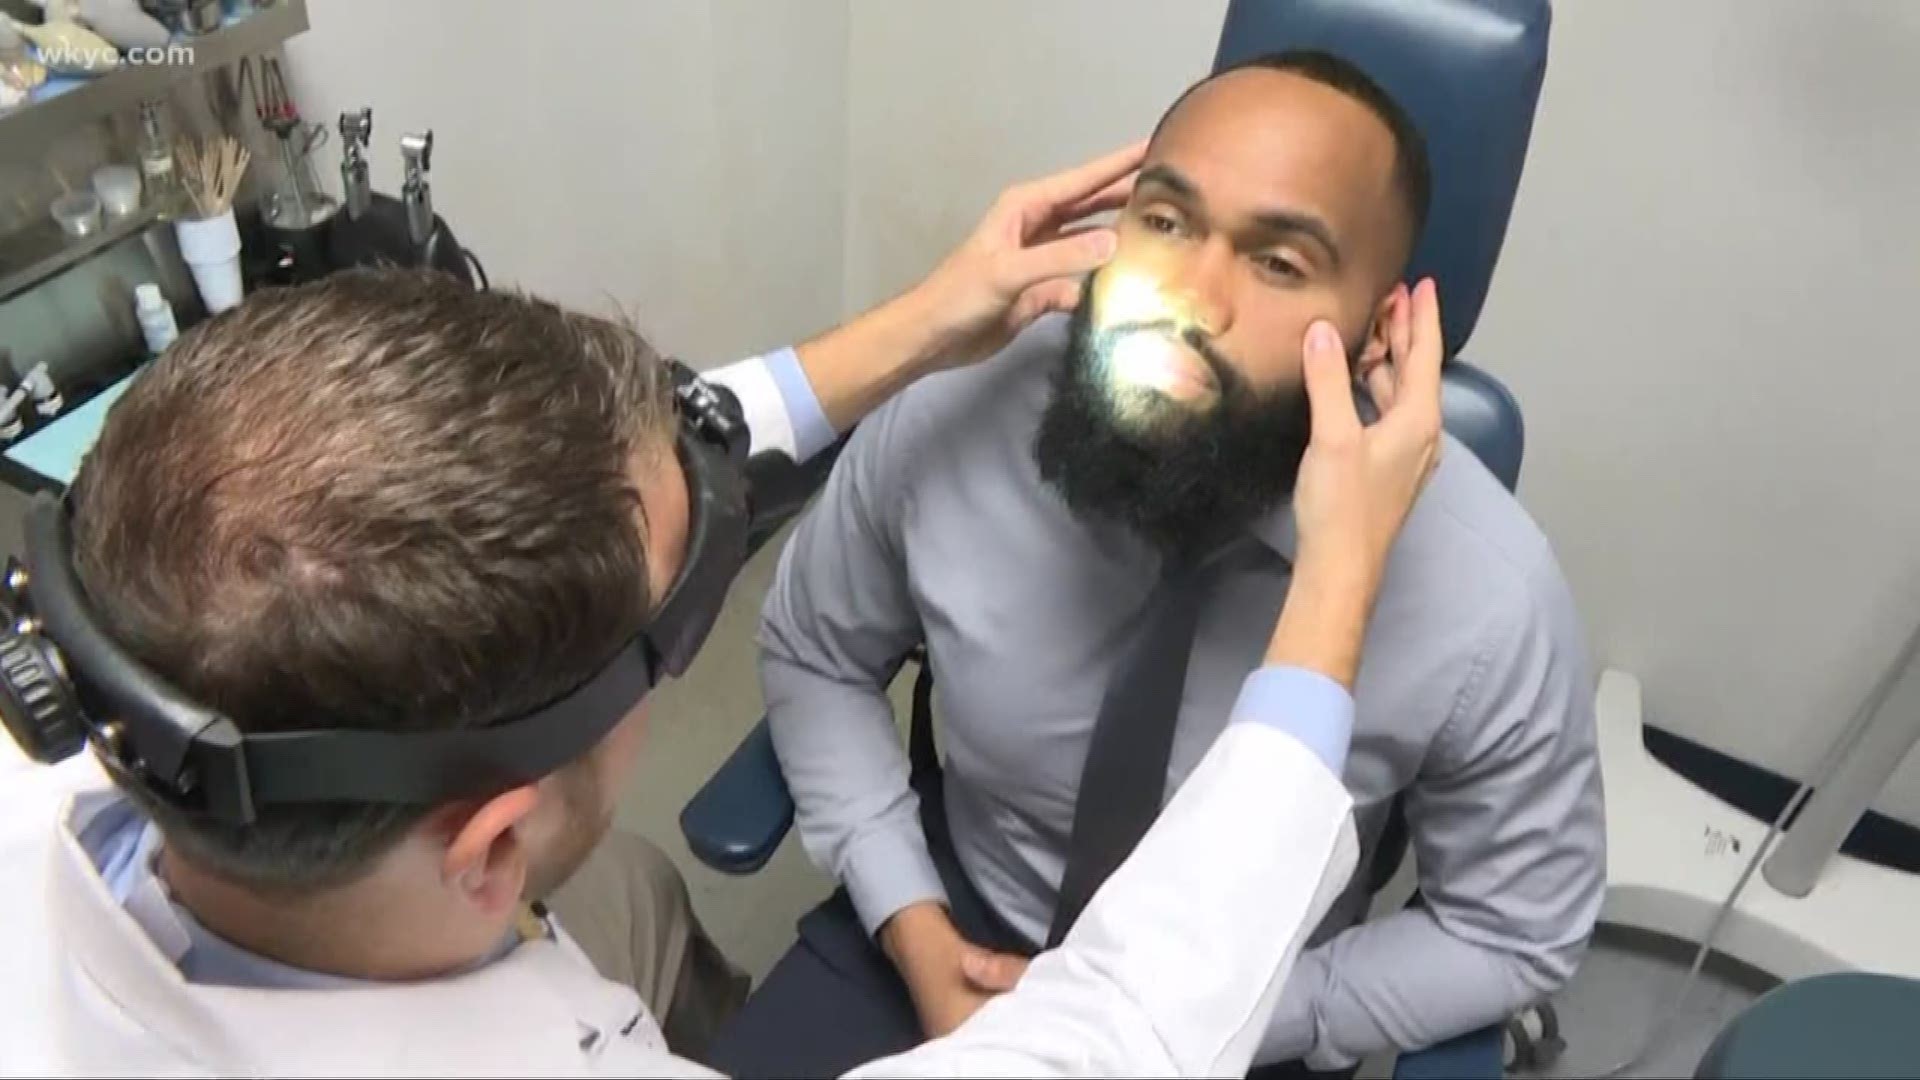 Could growing a beard help your allergies